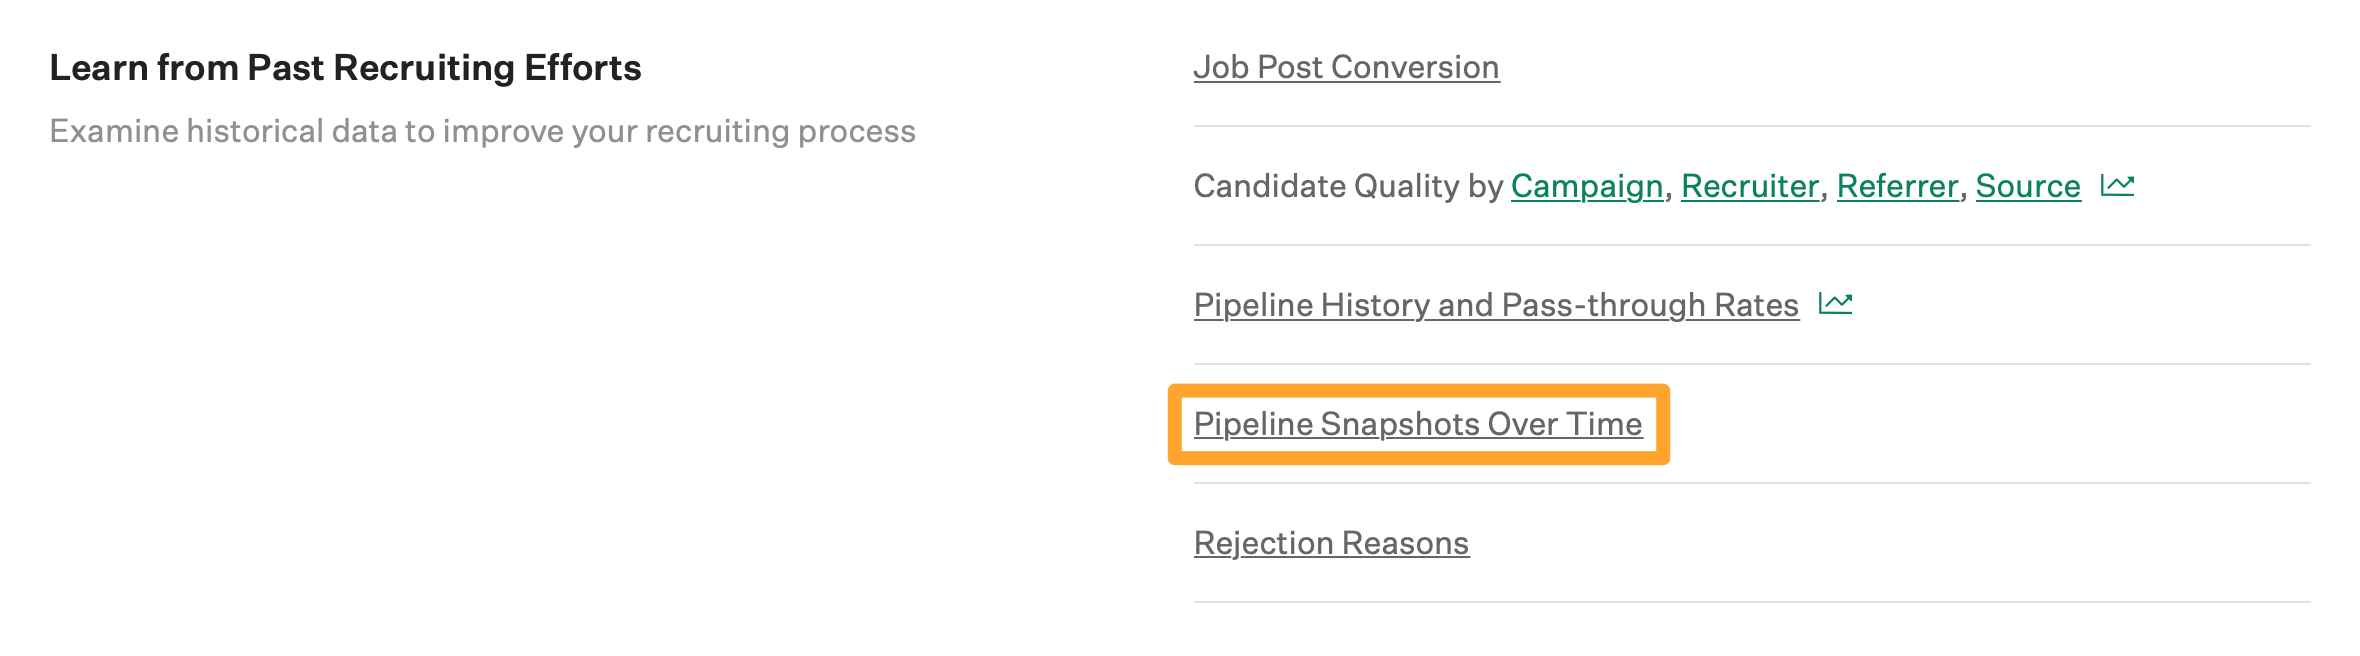 Screenshot of pipeline snapshots over time report button